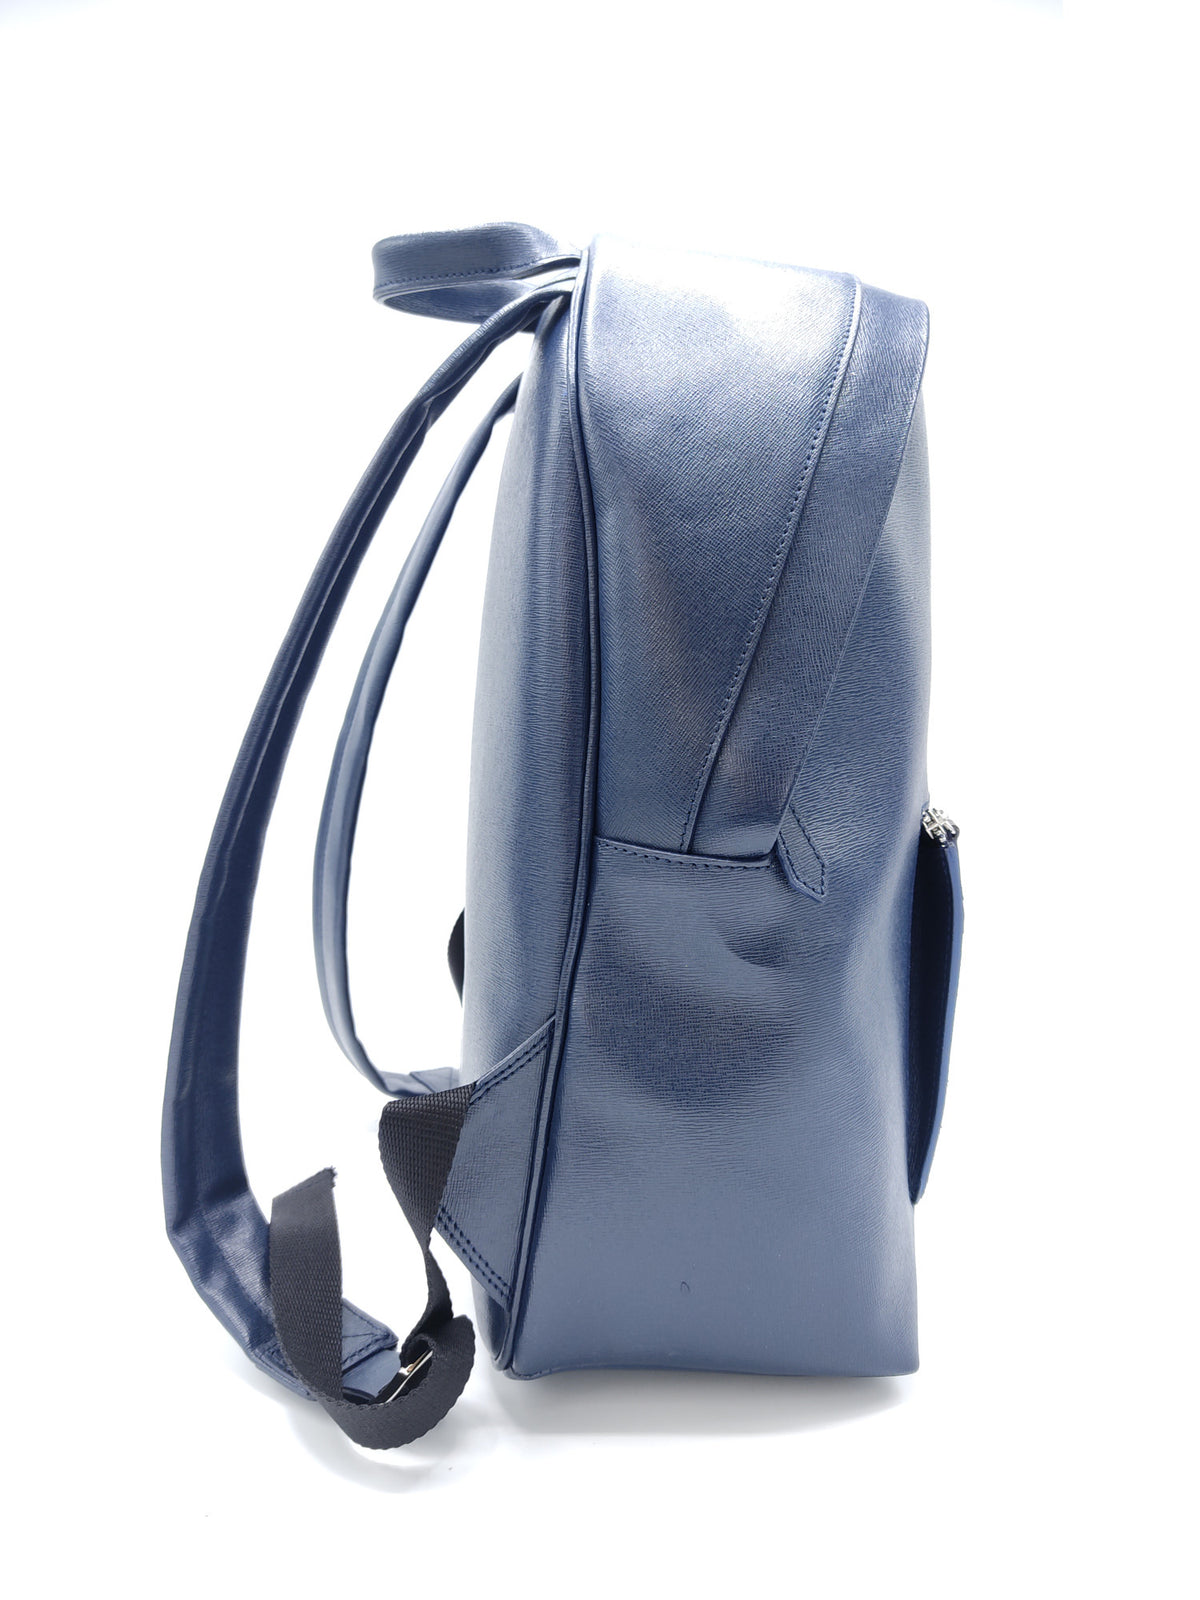 Saffiano leather backpack art. 112291